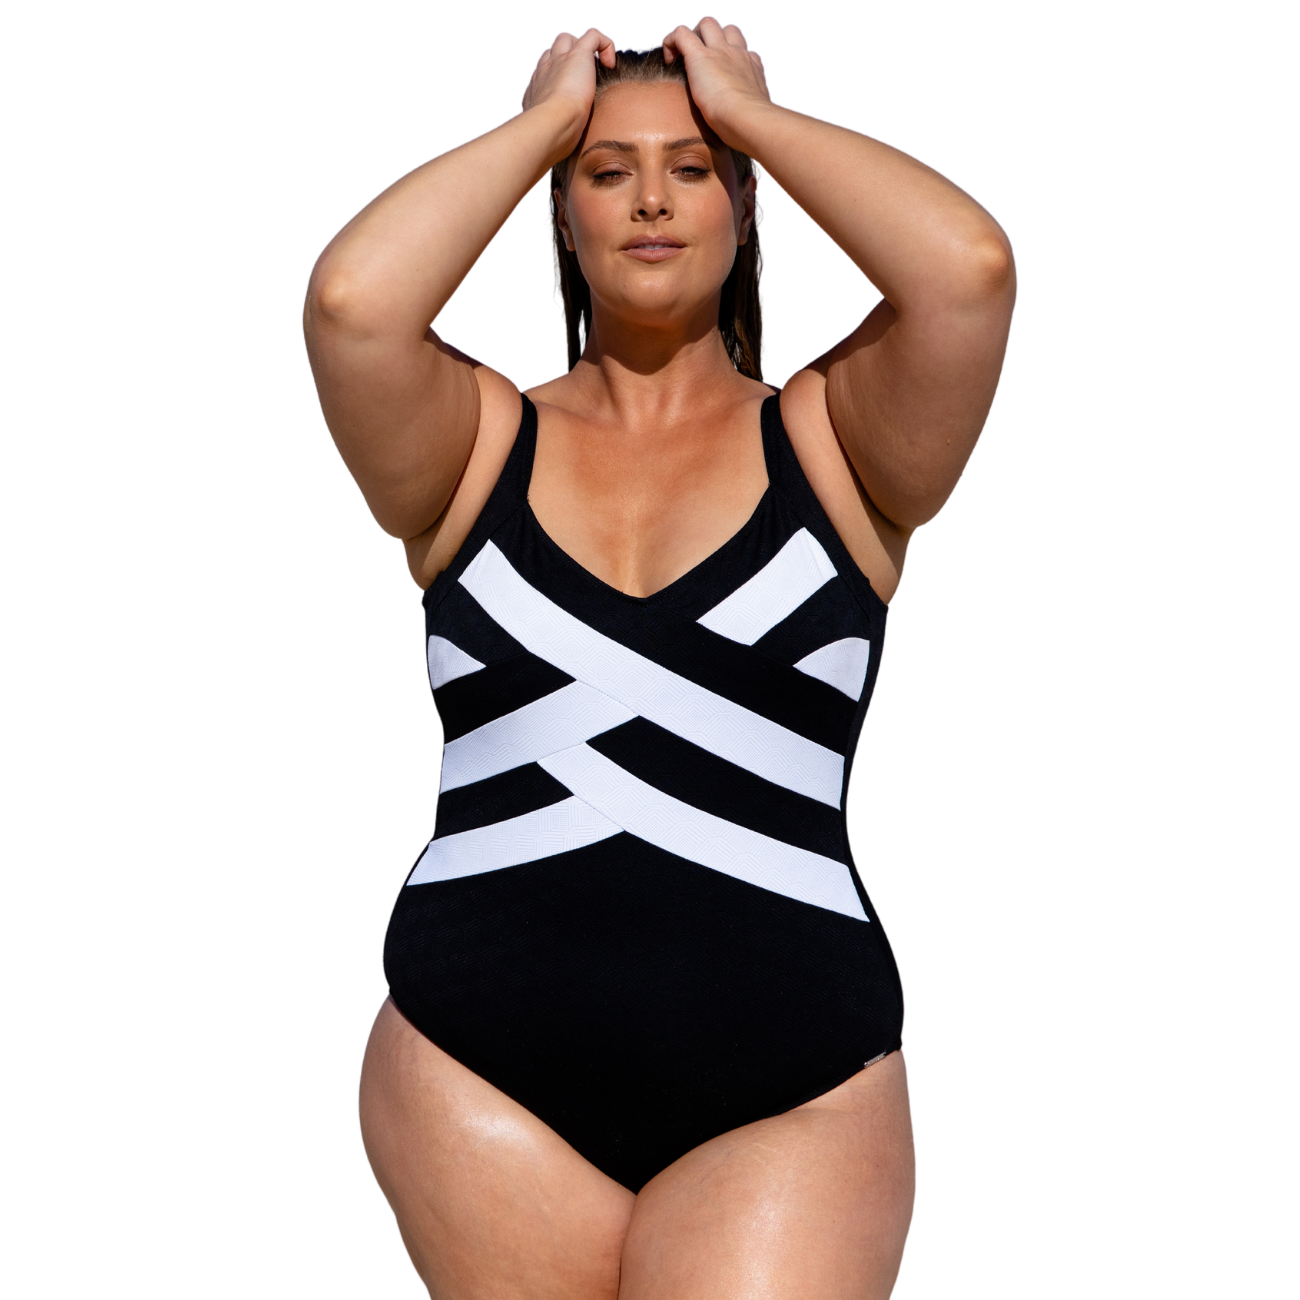 What size is a small in swimsuits?